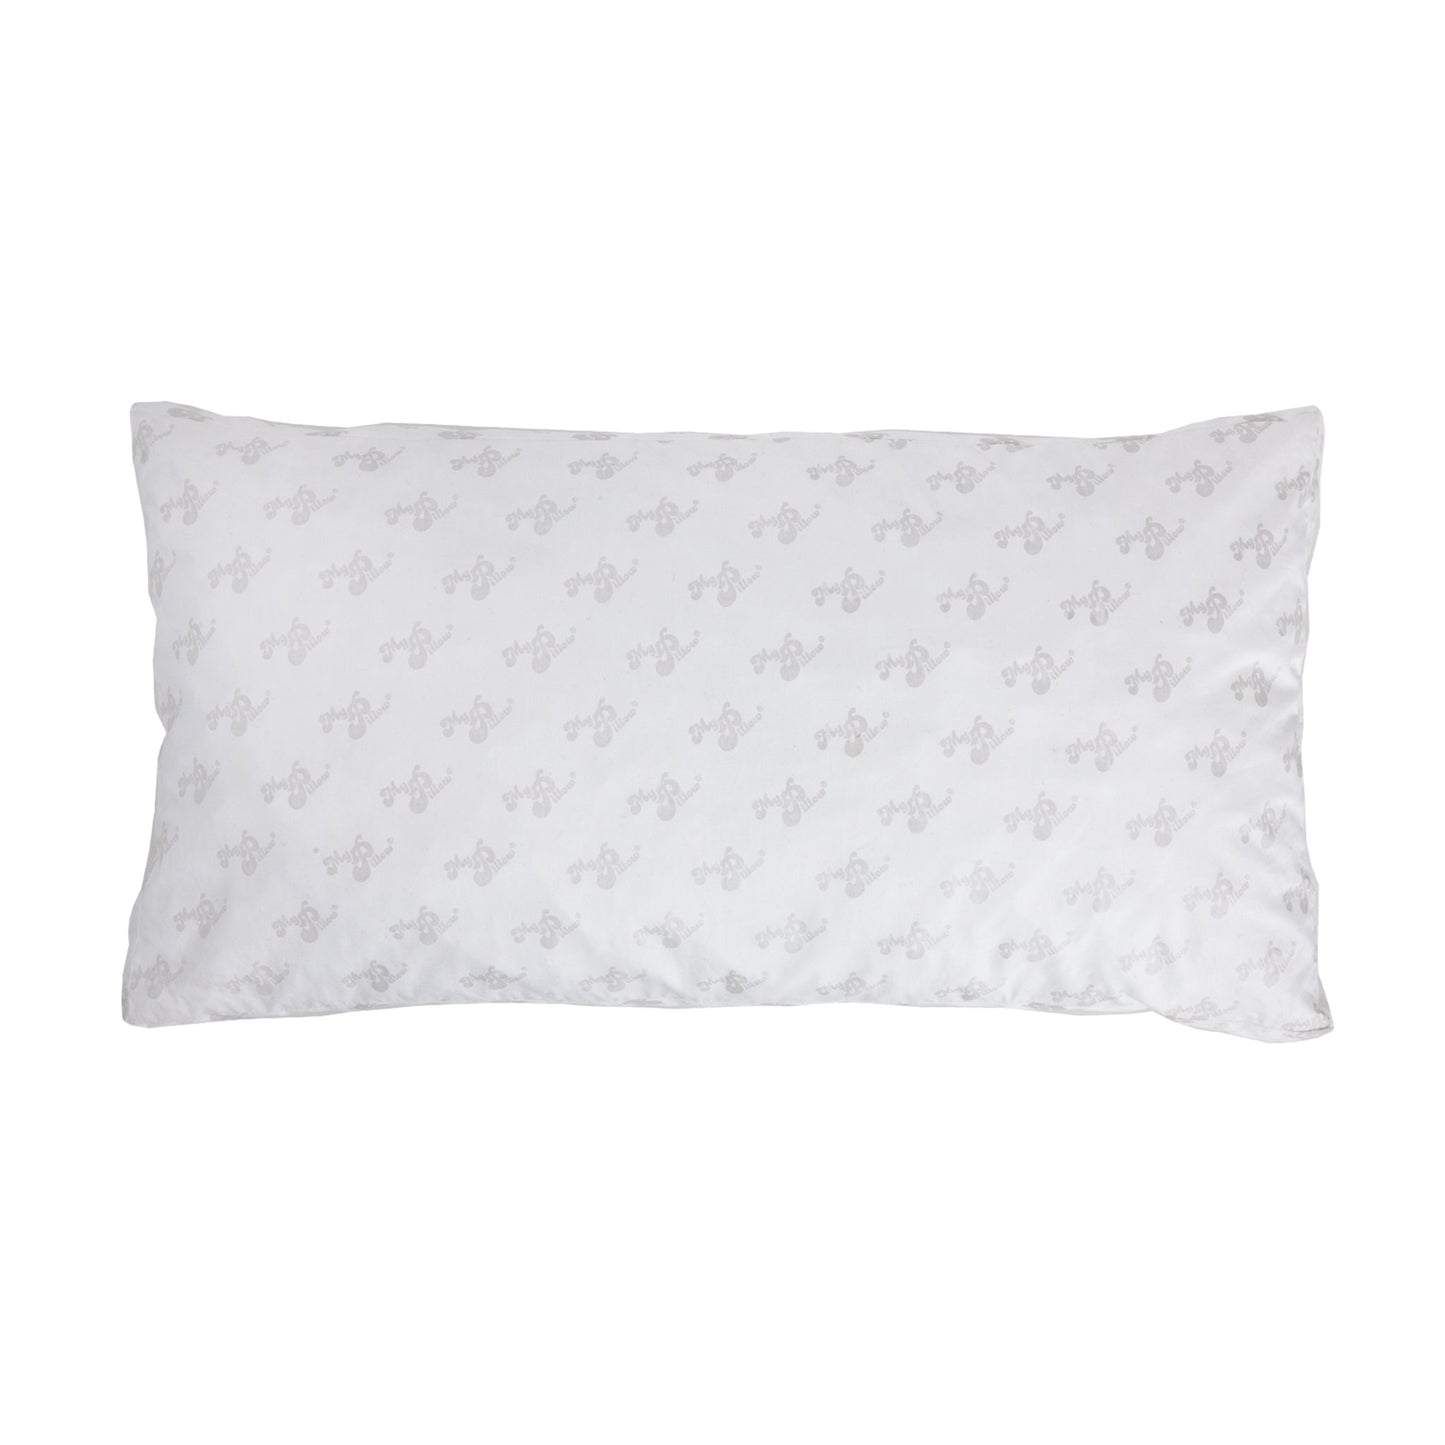 My Pillow - Extra Long/King Bed Premium Pillow-Level 2 (White)